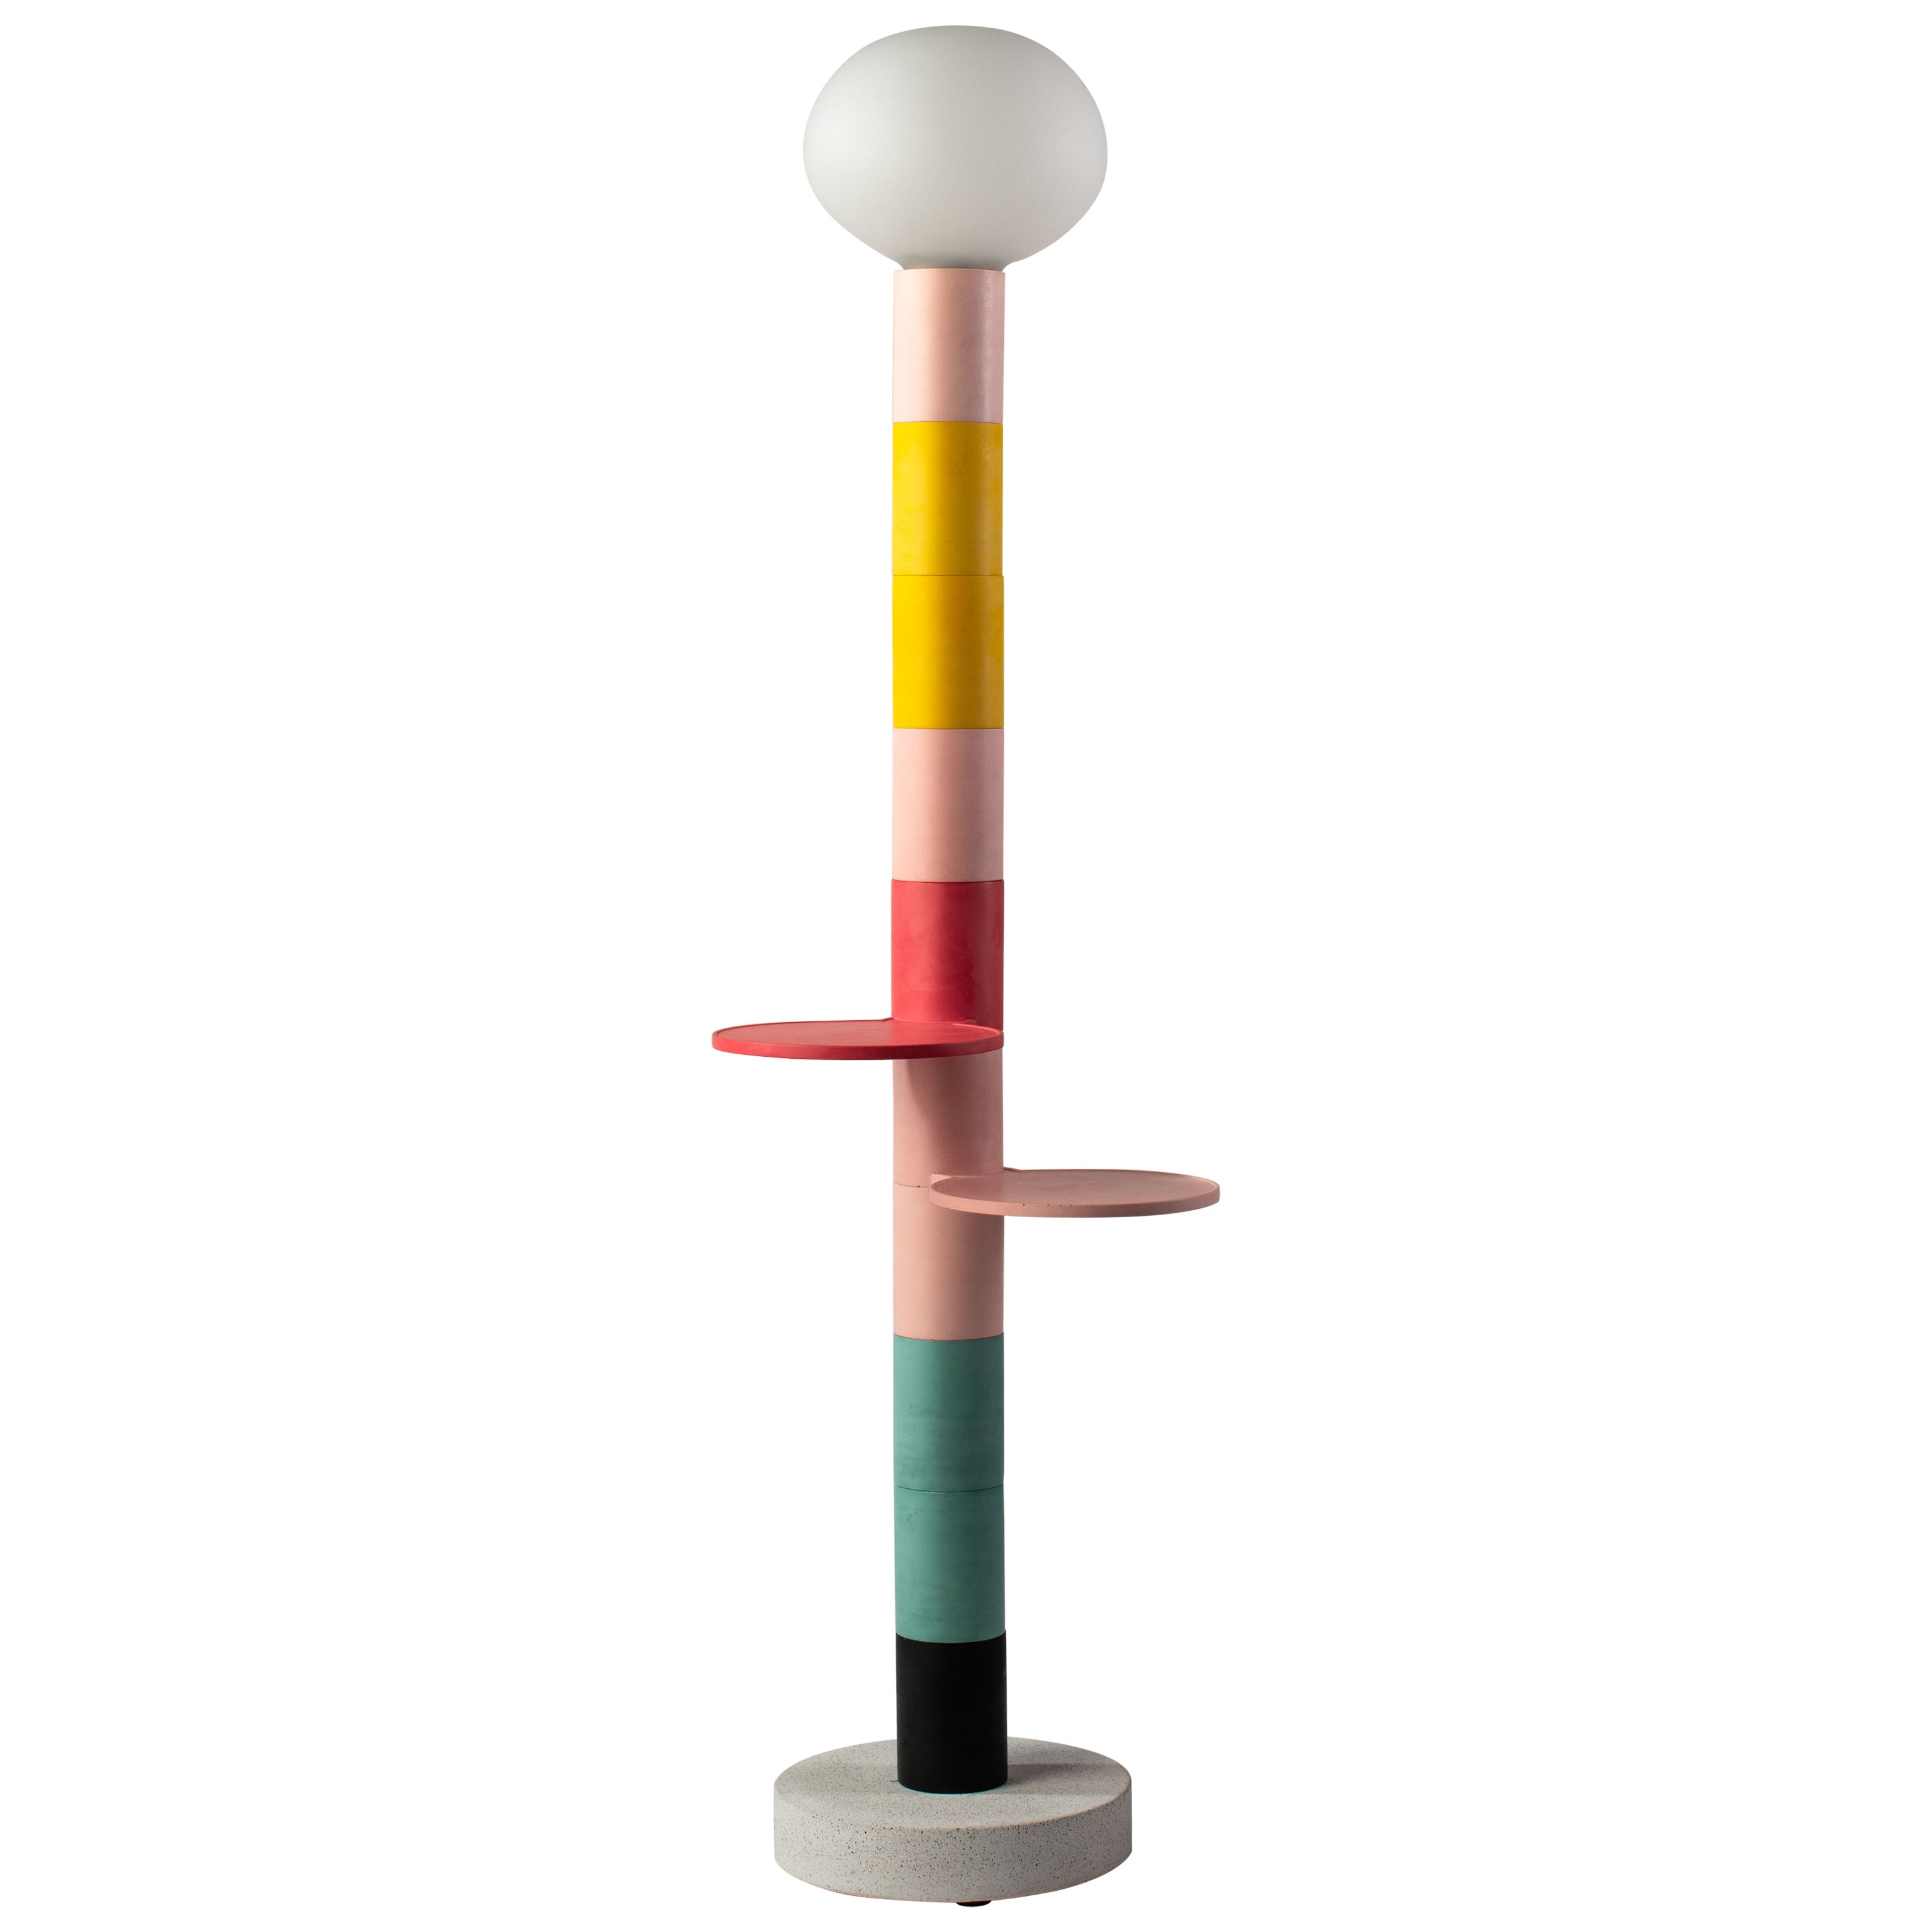 Ciluzio Lisa by AAMA Design / Modular Pop Floor Lamp Made by Hand in France For Sale